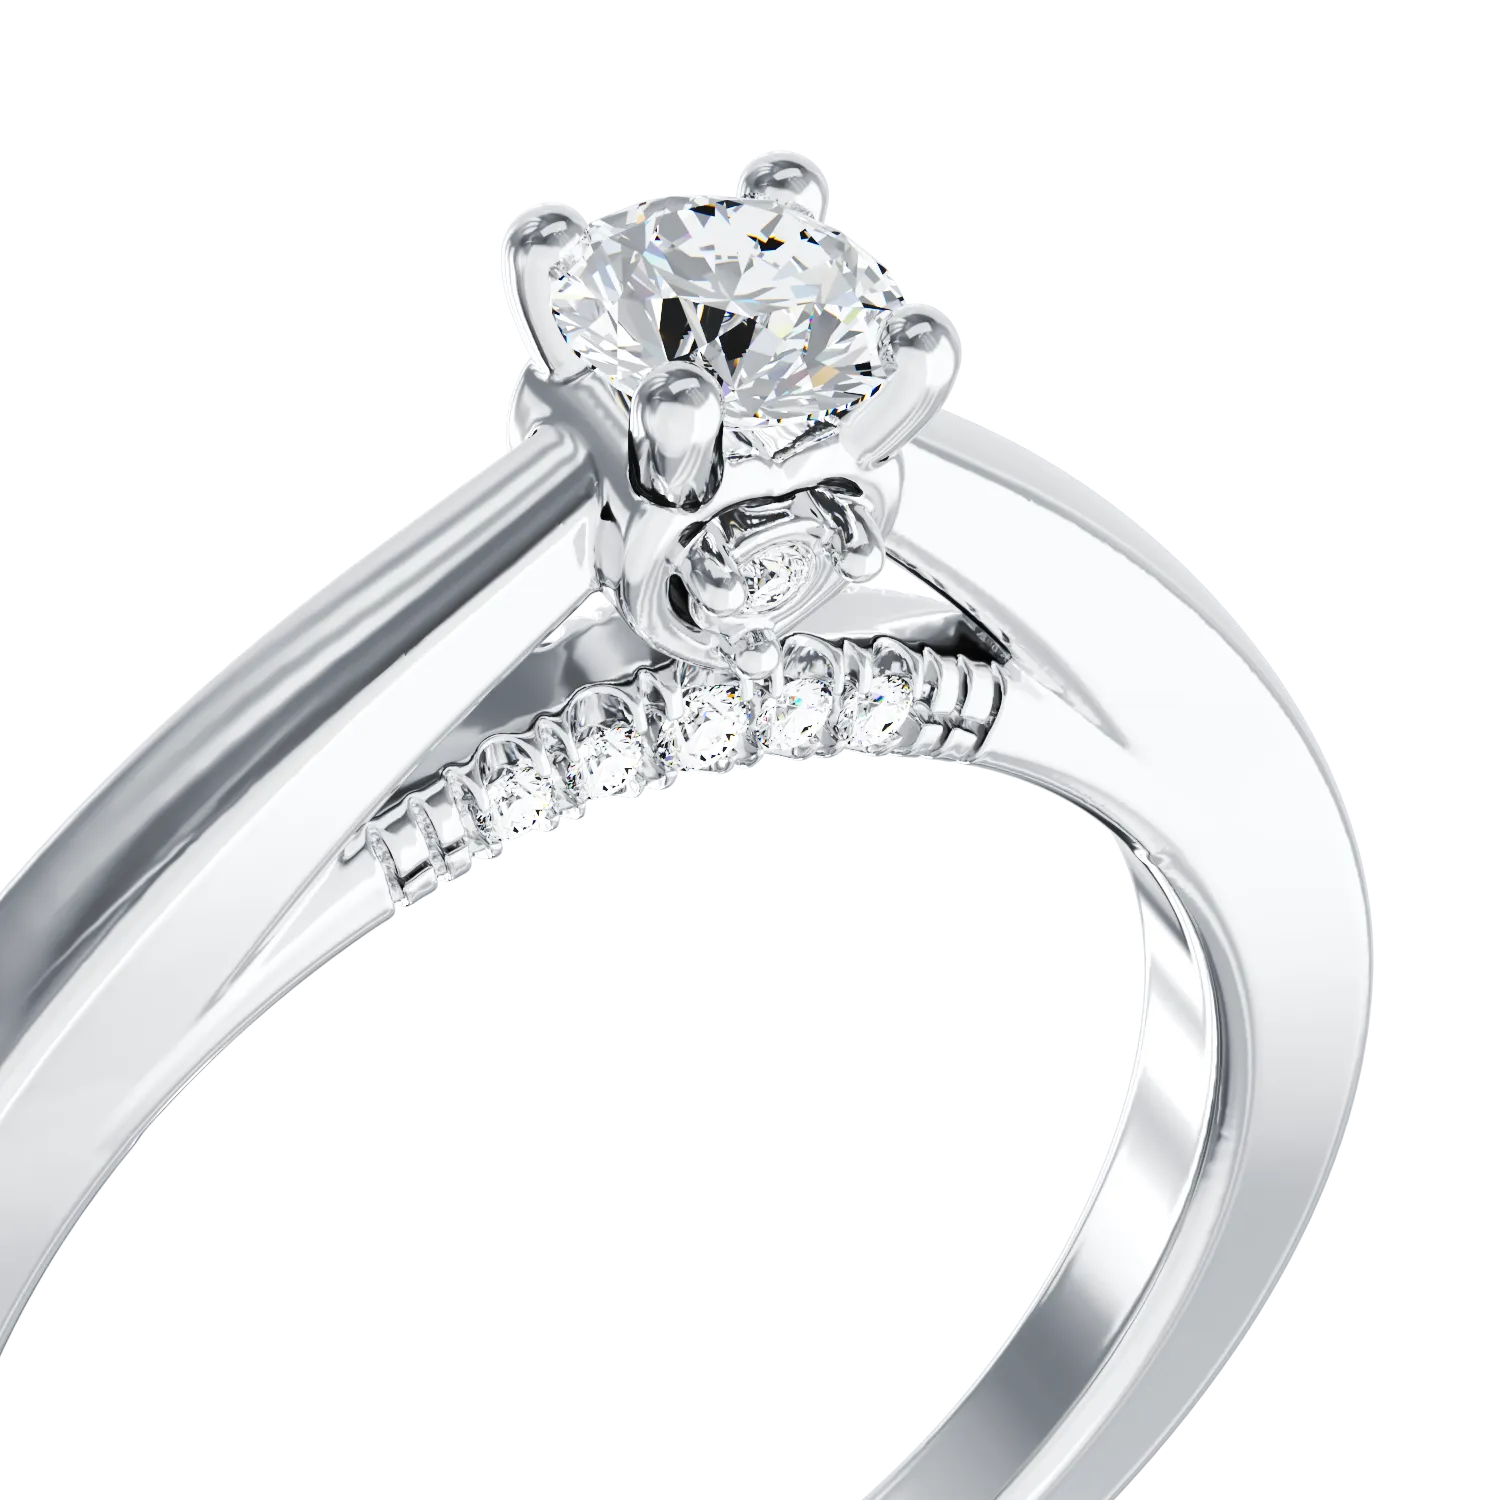 18K white gold engagement ring with 0.19ct diamond and 0.05ct diamond